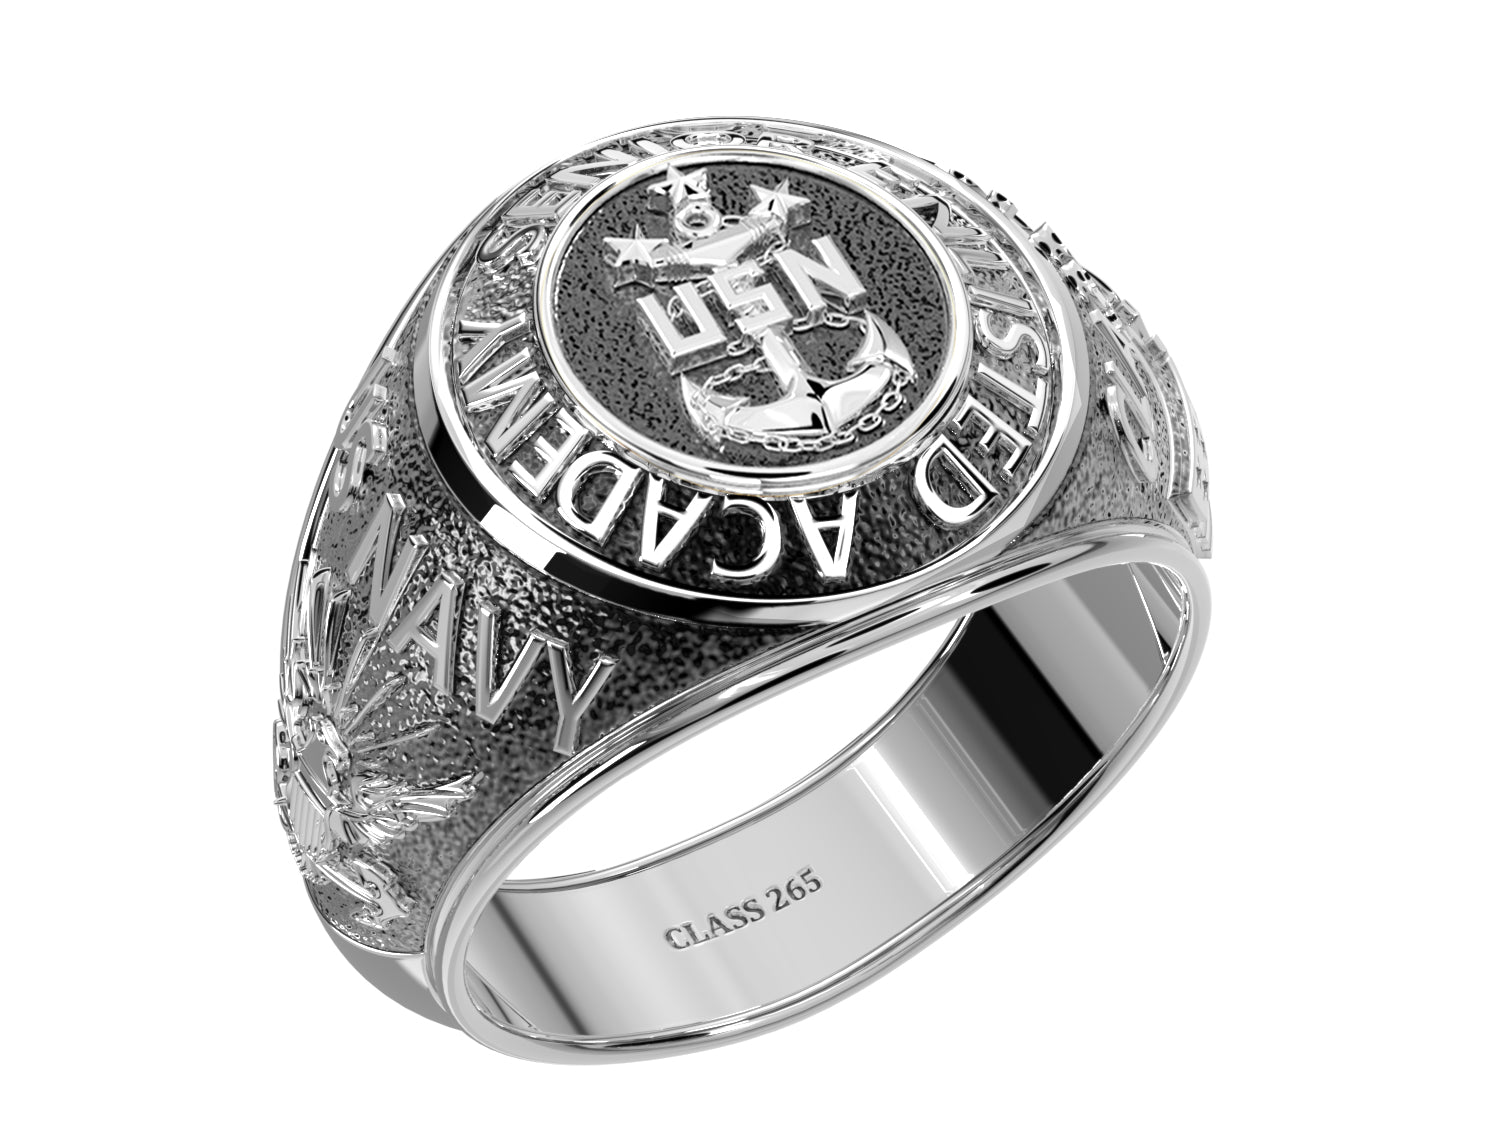 Personalized SEA US Navy Class Ring